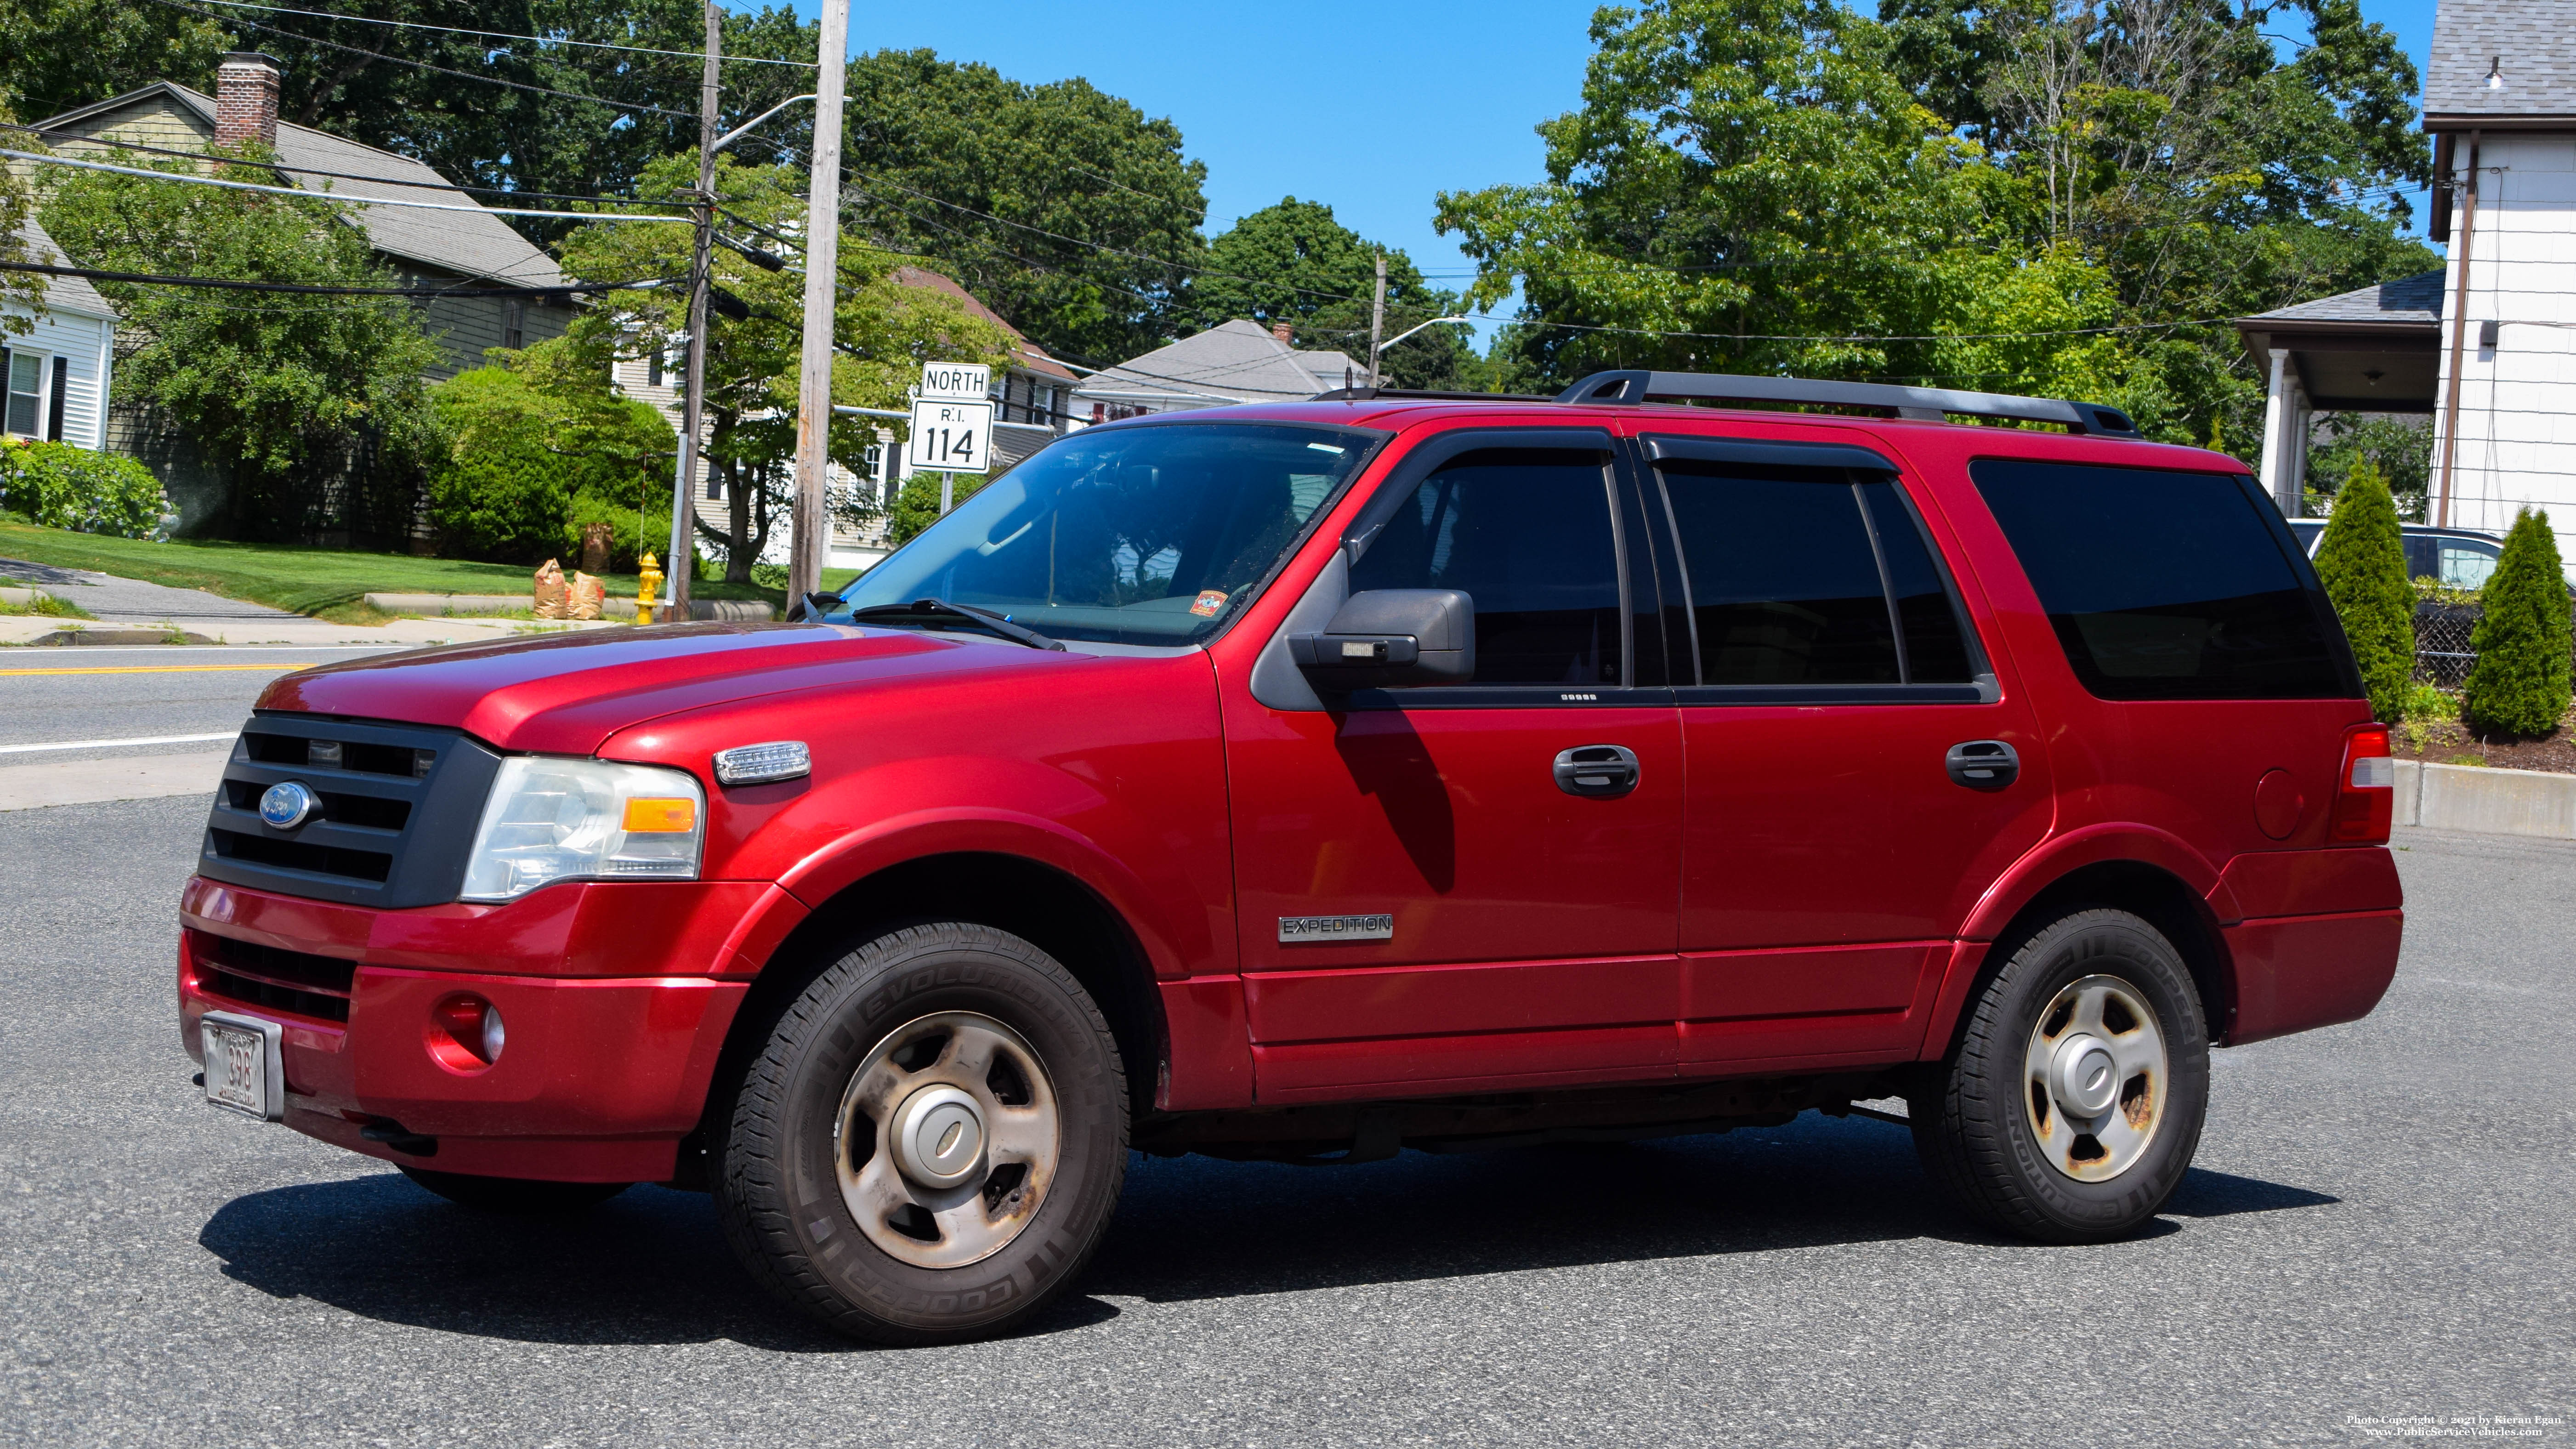 A photo  of Cumberland Fire
            Car 3, a 2008 Ford Expedition             taken by Kieran Egan